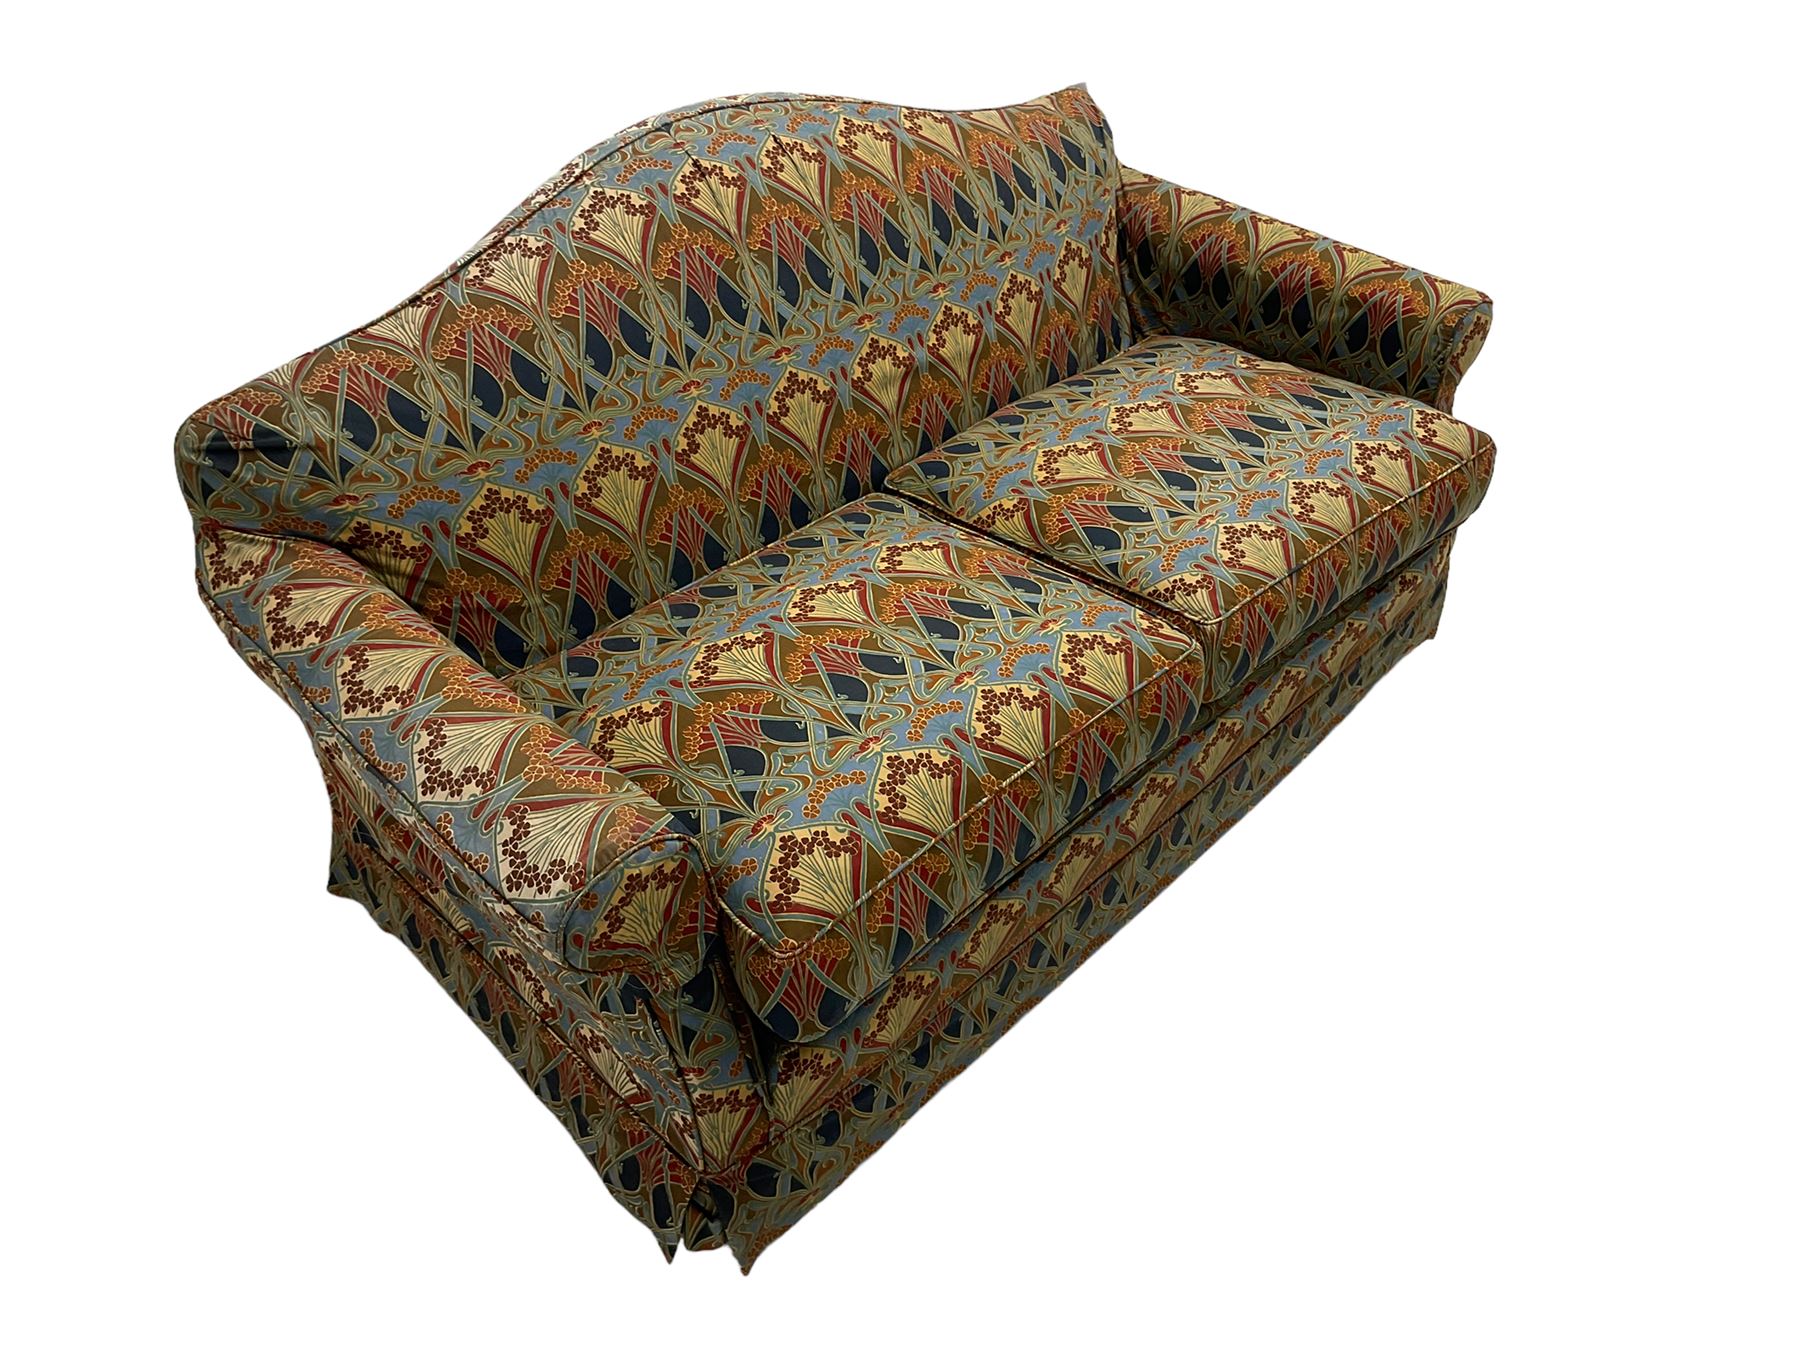 Two seat traditional shape sofa - Image 3 of 6